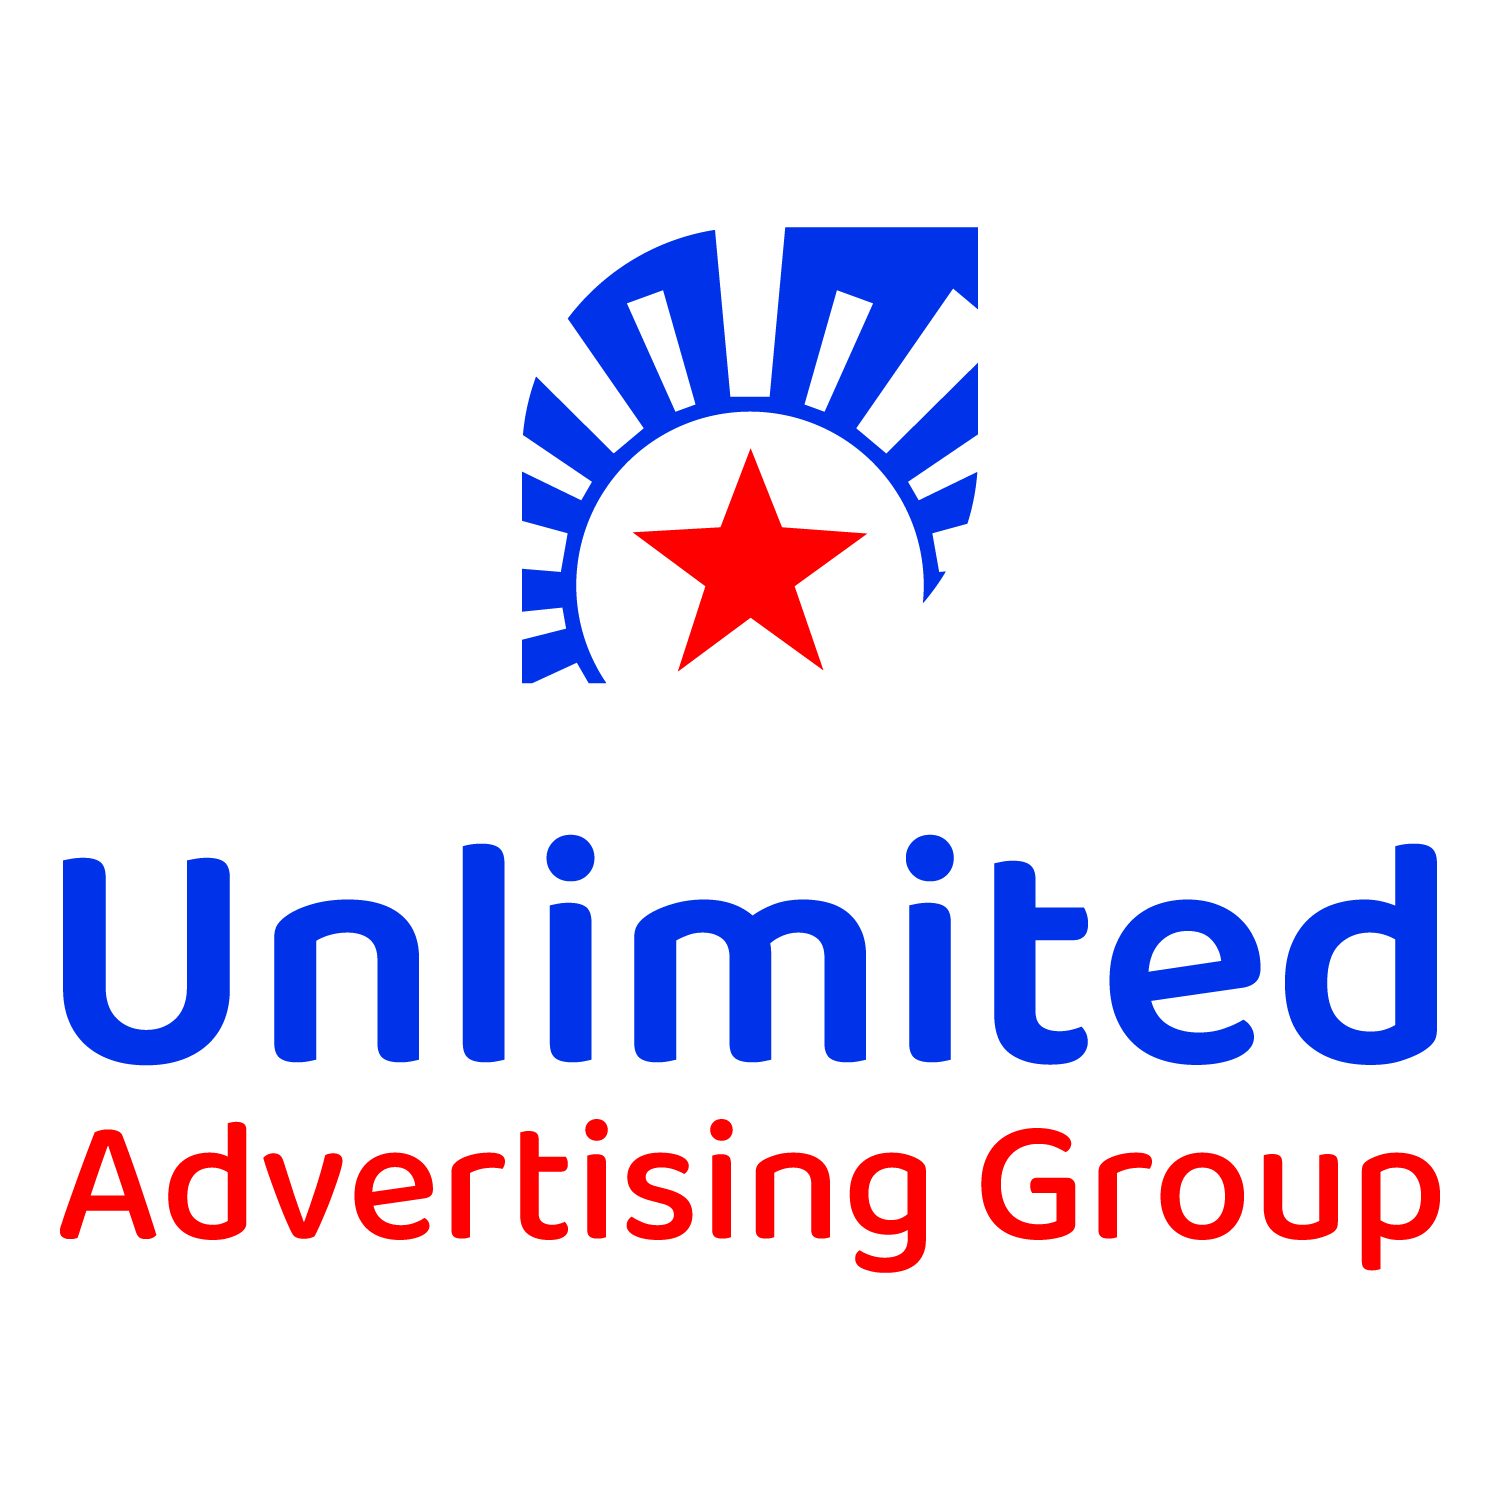 Unlimited Advertising Group Logo